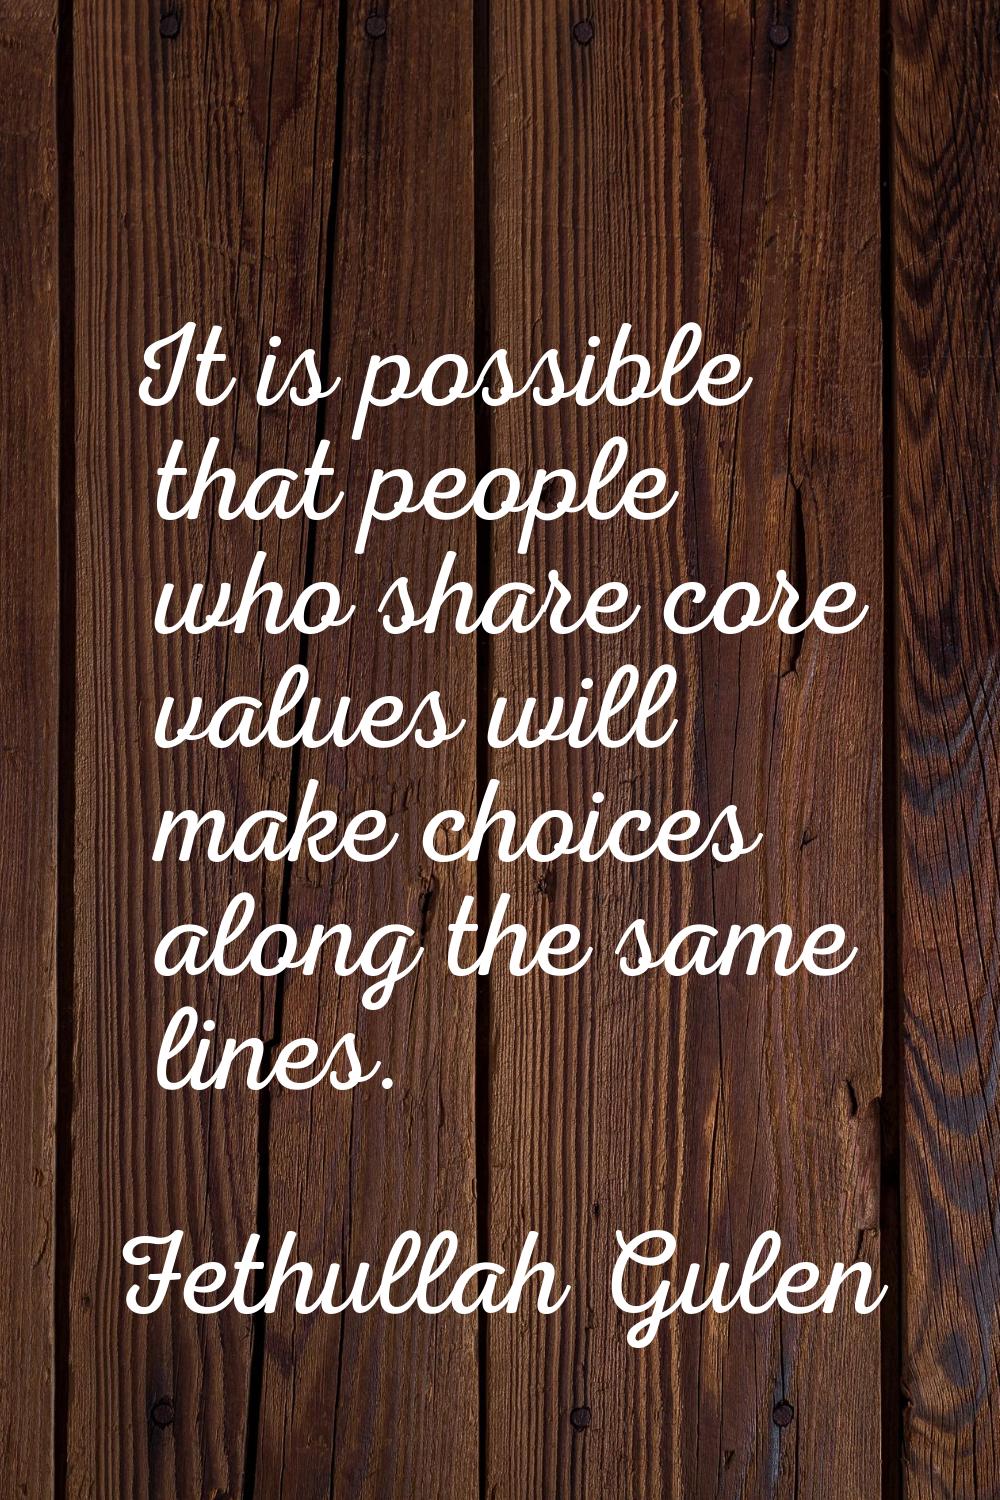 It is possible that people who share core values will make choices along the same lines.